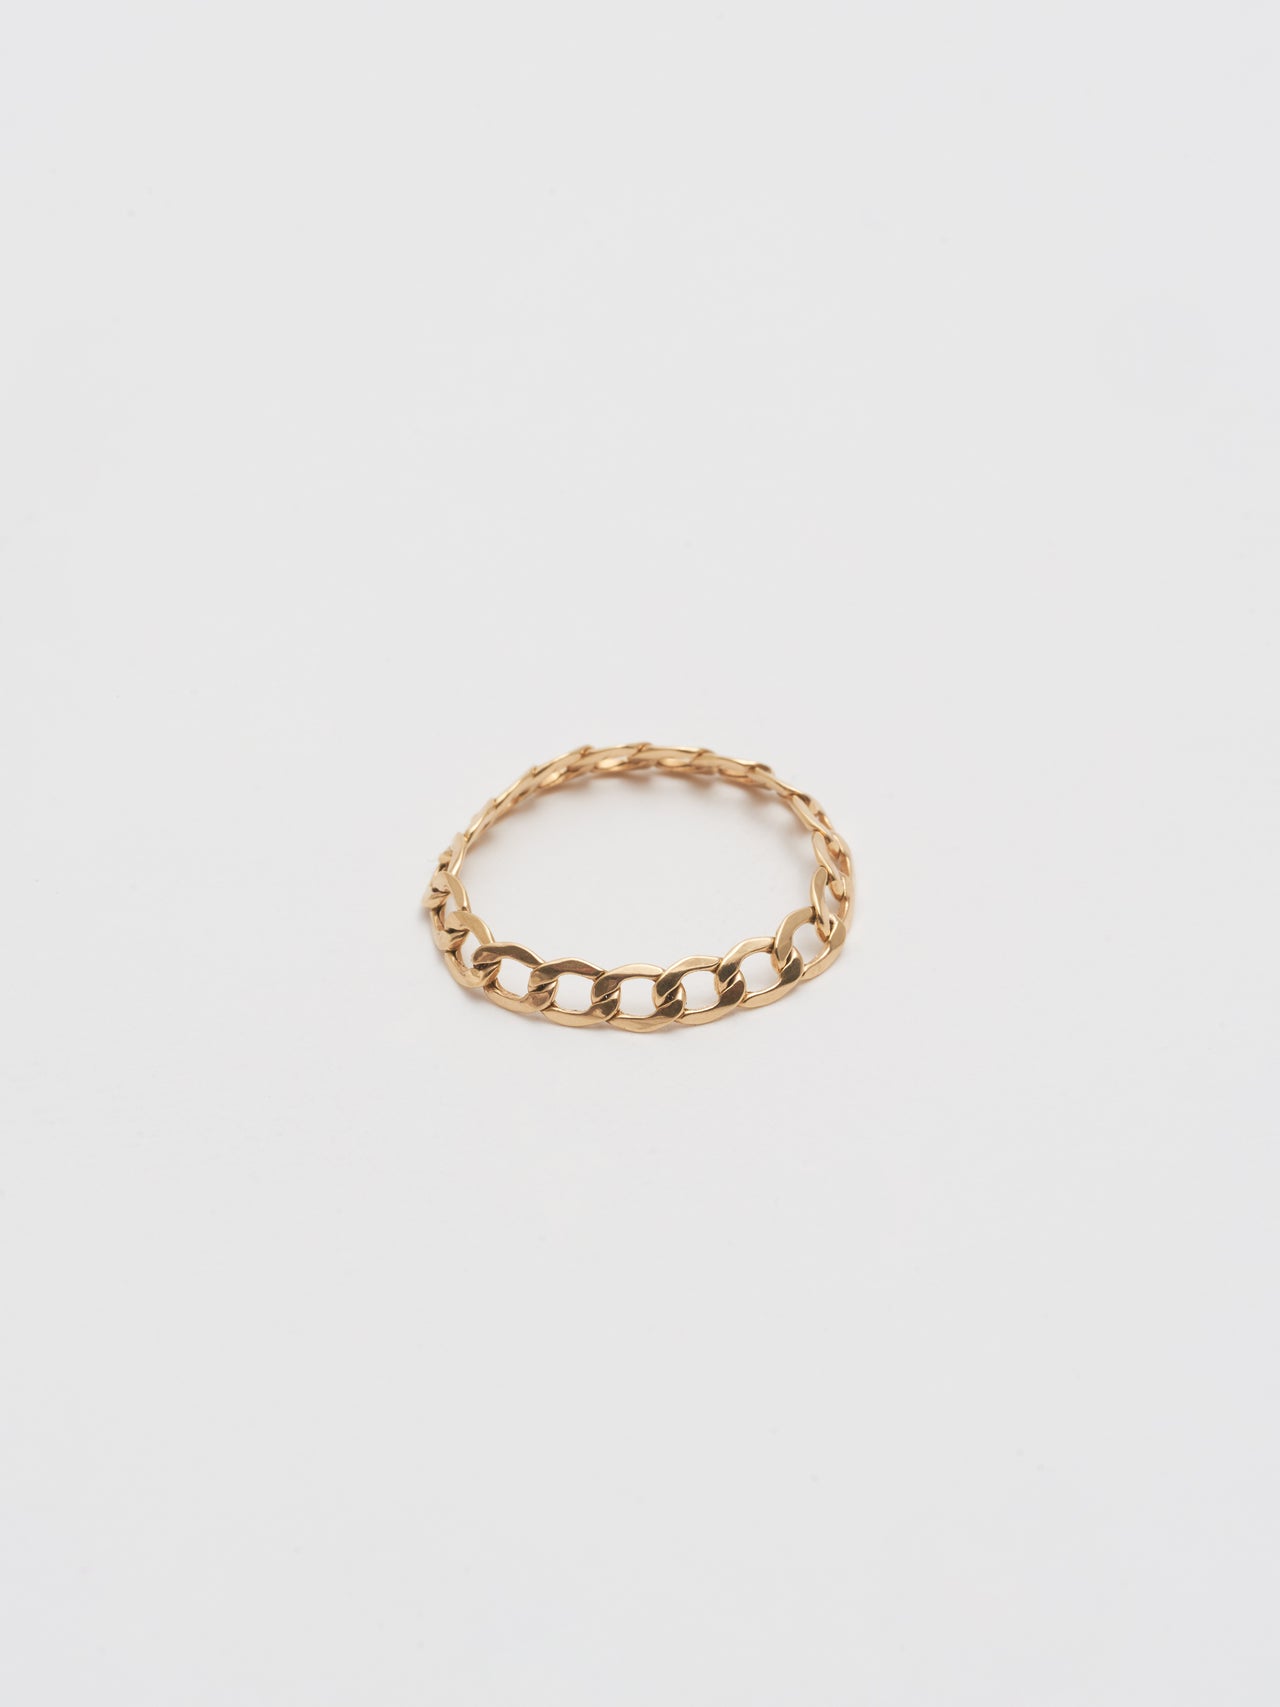 Product Shot of Havana Chain Ring (14kt Shiny Yellow Gold Hollow Flat Curb Chain with a width of 3.3mm) against white background